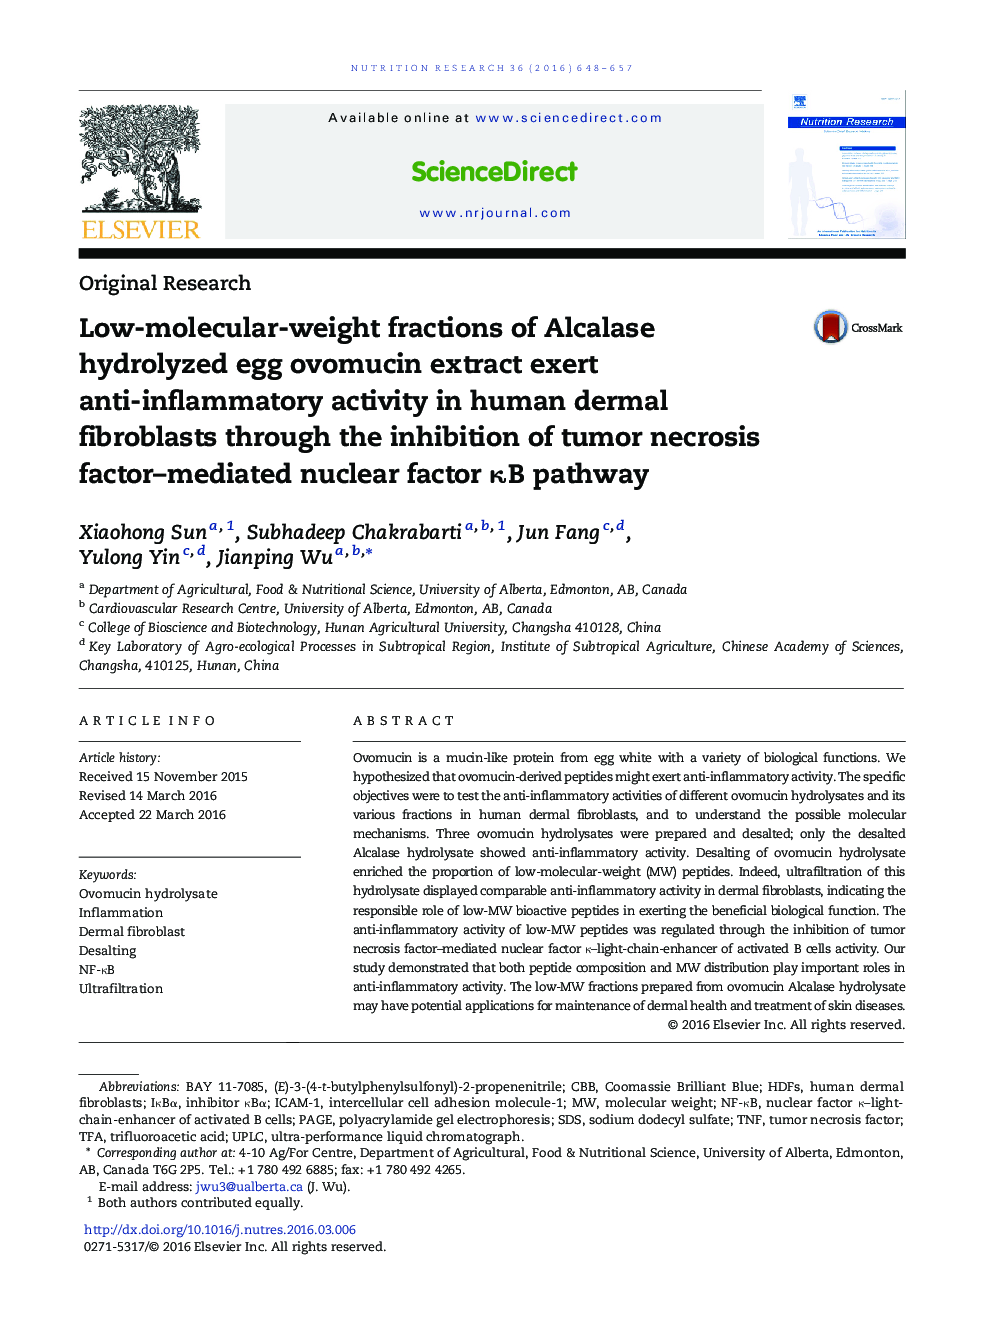 Low-molecular-weight fractions of Alcalase hydrolyzed egg ovomucin extract exert anti-inflammatory activity in human dermal fibroblasts through the inhibition of tumor necrosis factor–mediated nuclear factor κB pathway